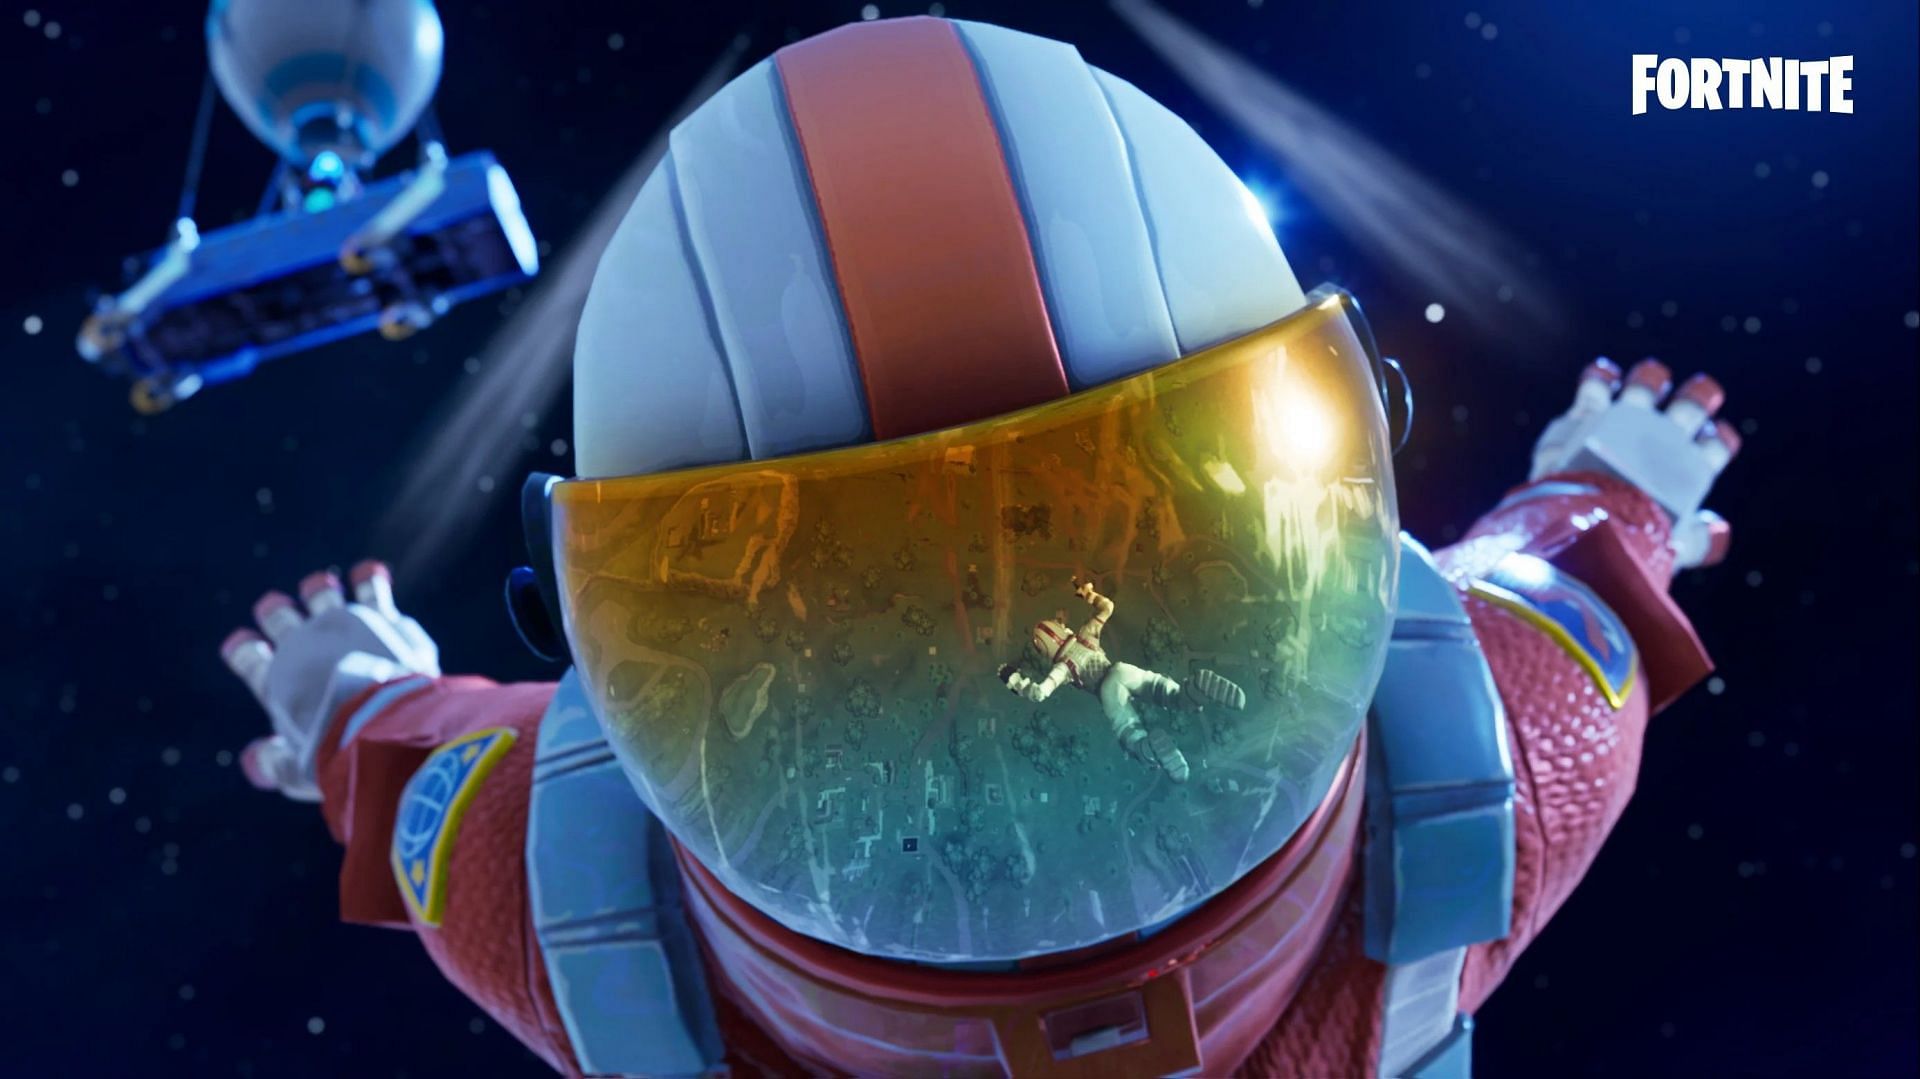 Fortnite in outer space